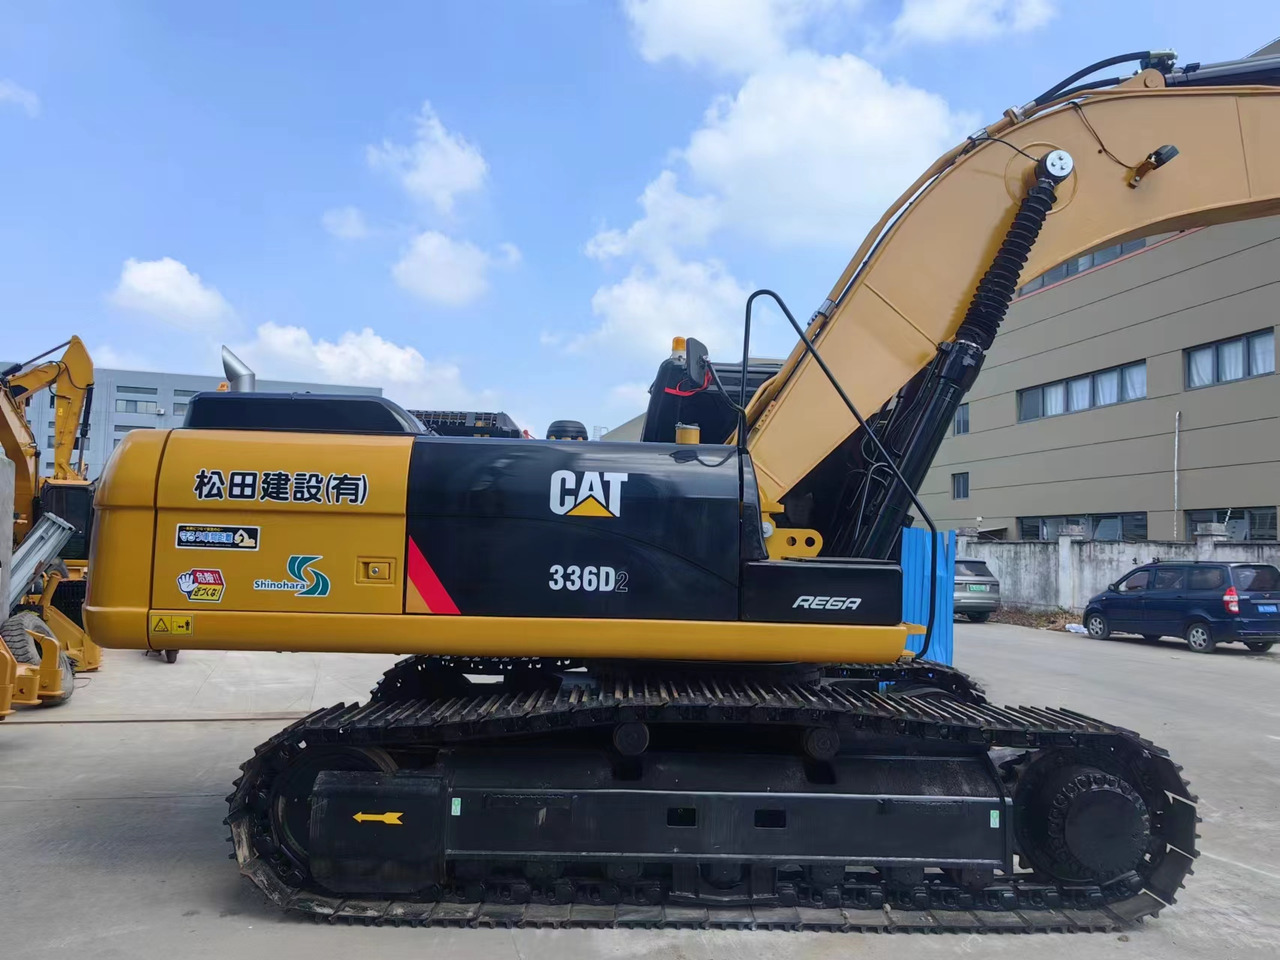 Crawler excavator 95%new Original Japan made CATERPILLAR Cat 336D2, Large engineering construction machinery good condition in stock hot selling !!!: picture 9